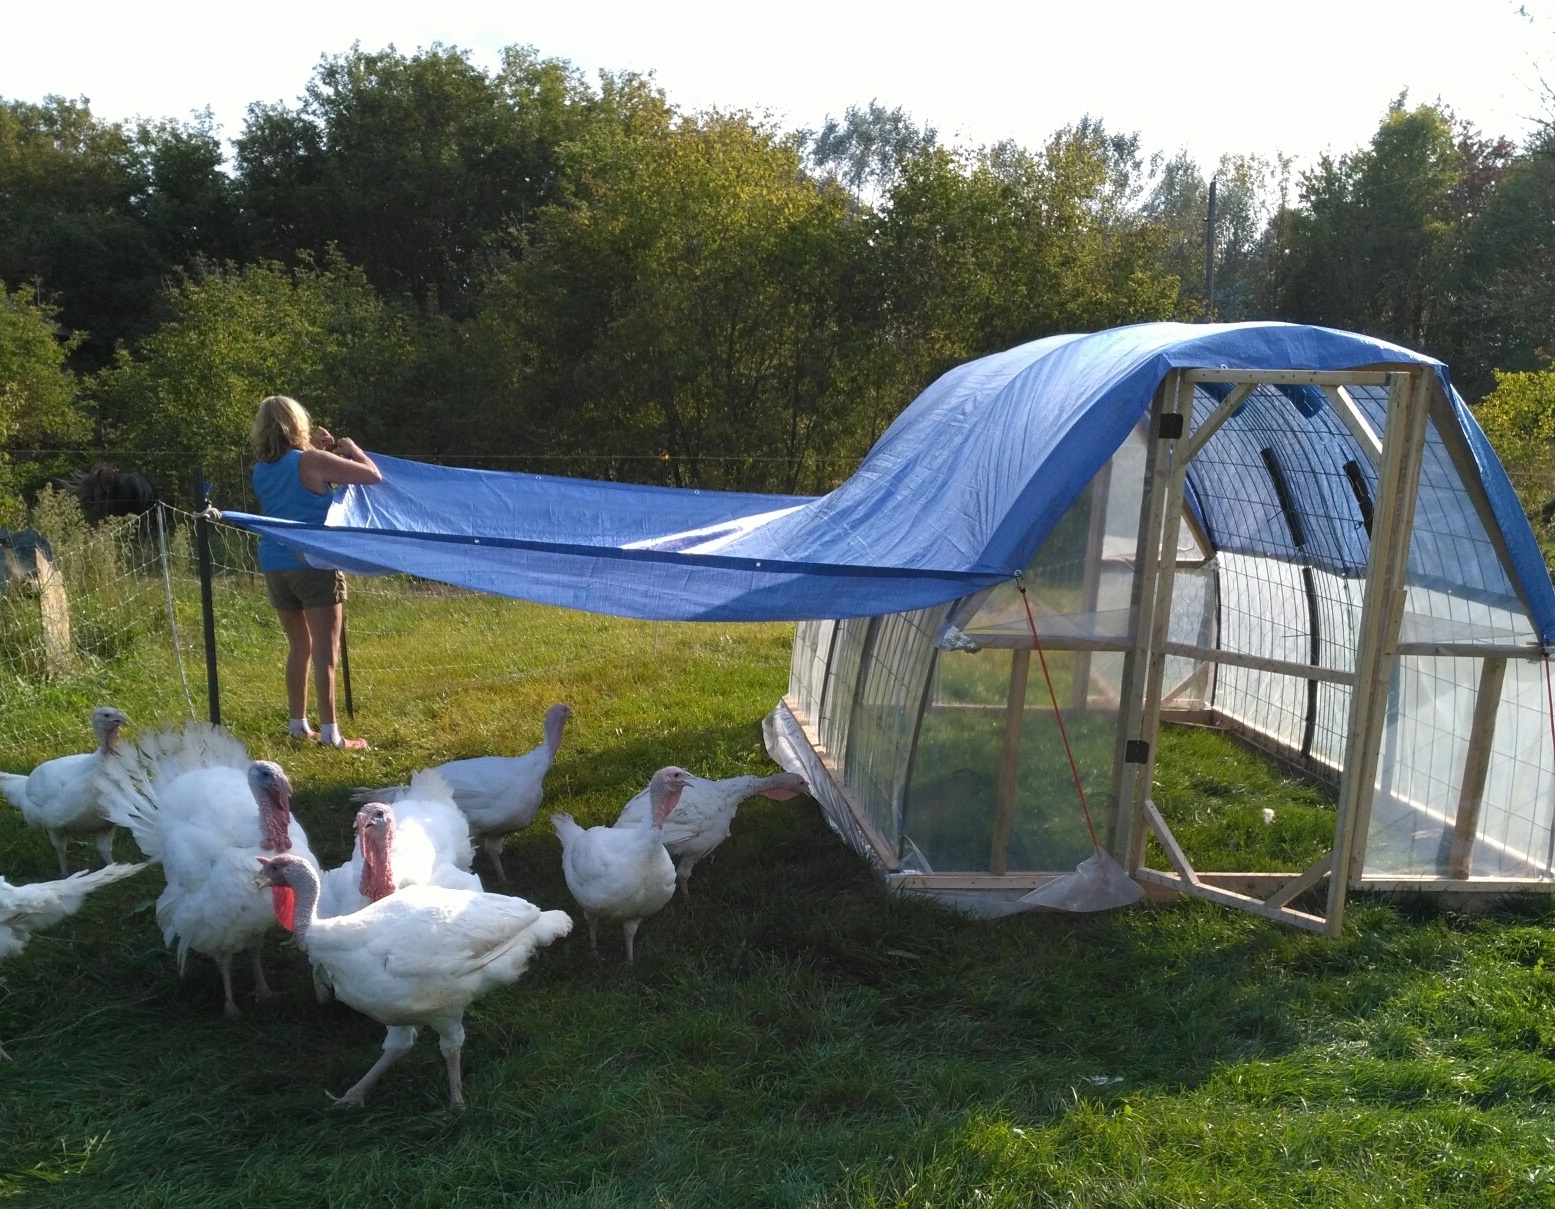 Build your own chicken coop on the cheap with these free chicken coop plans